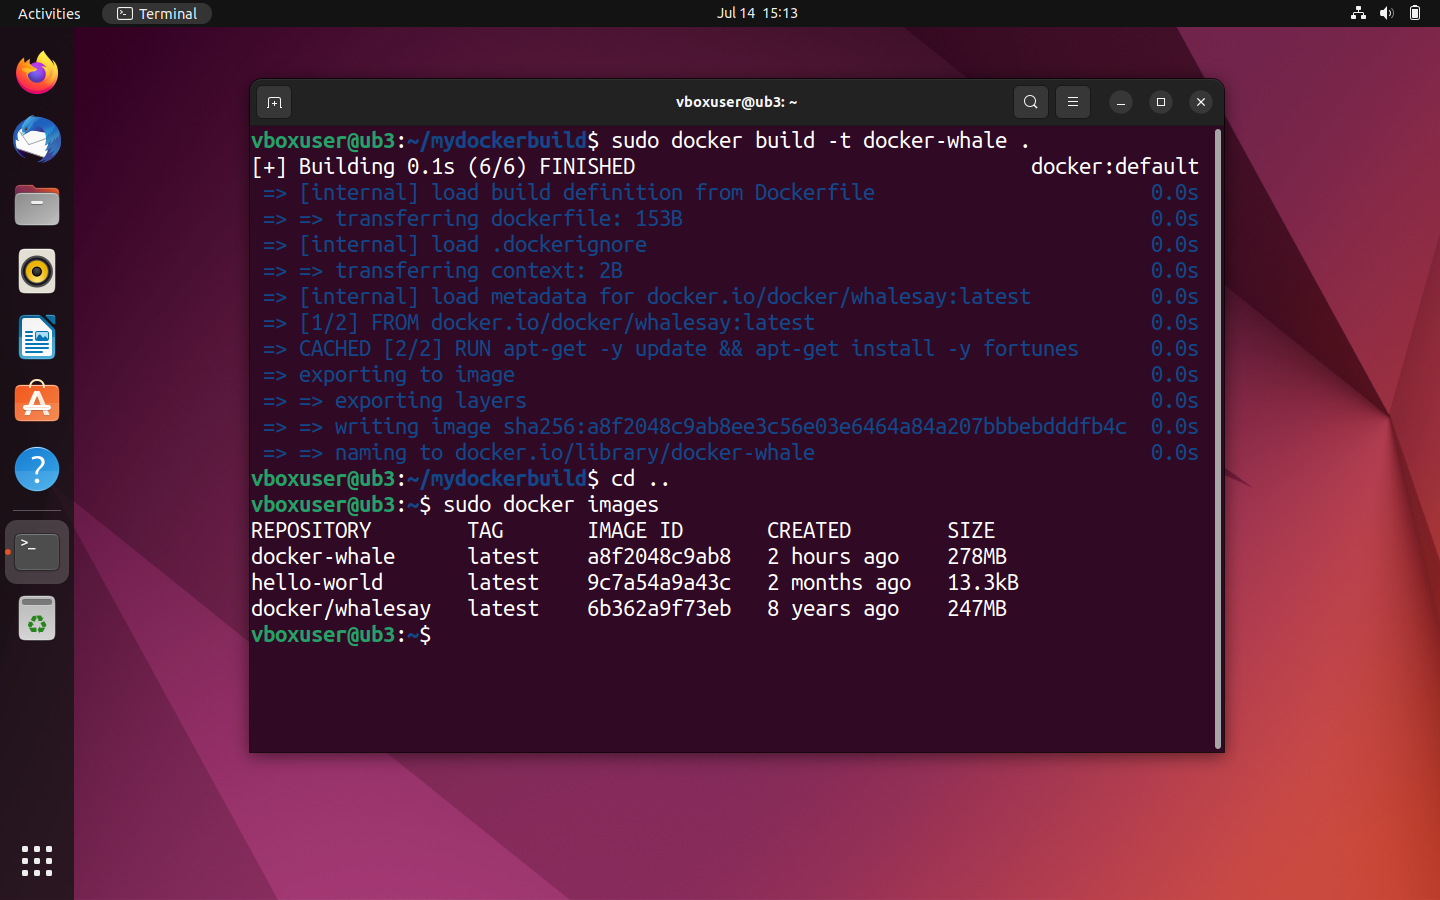 Ubuntu terminal: Overview of all images